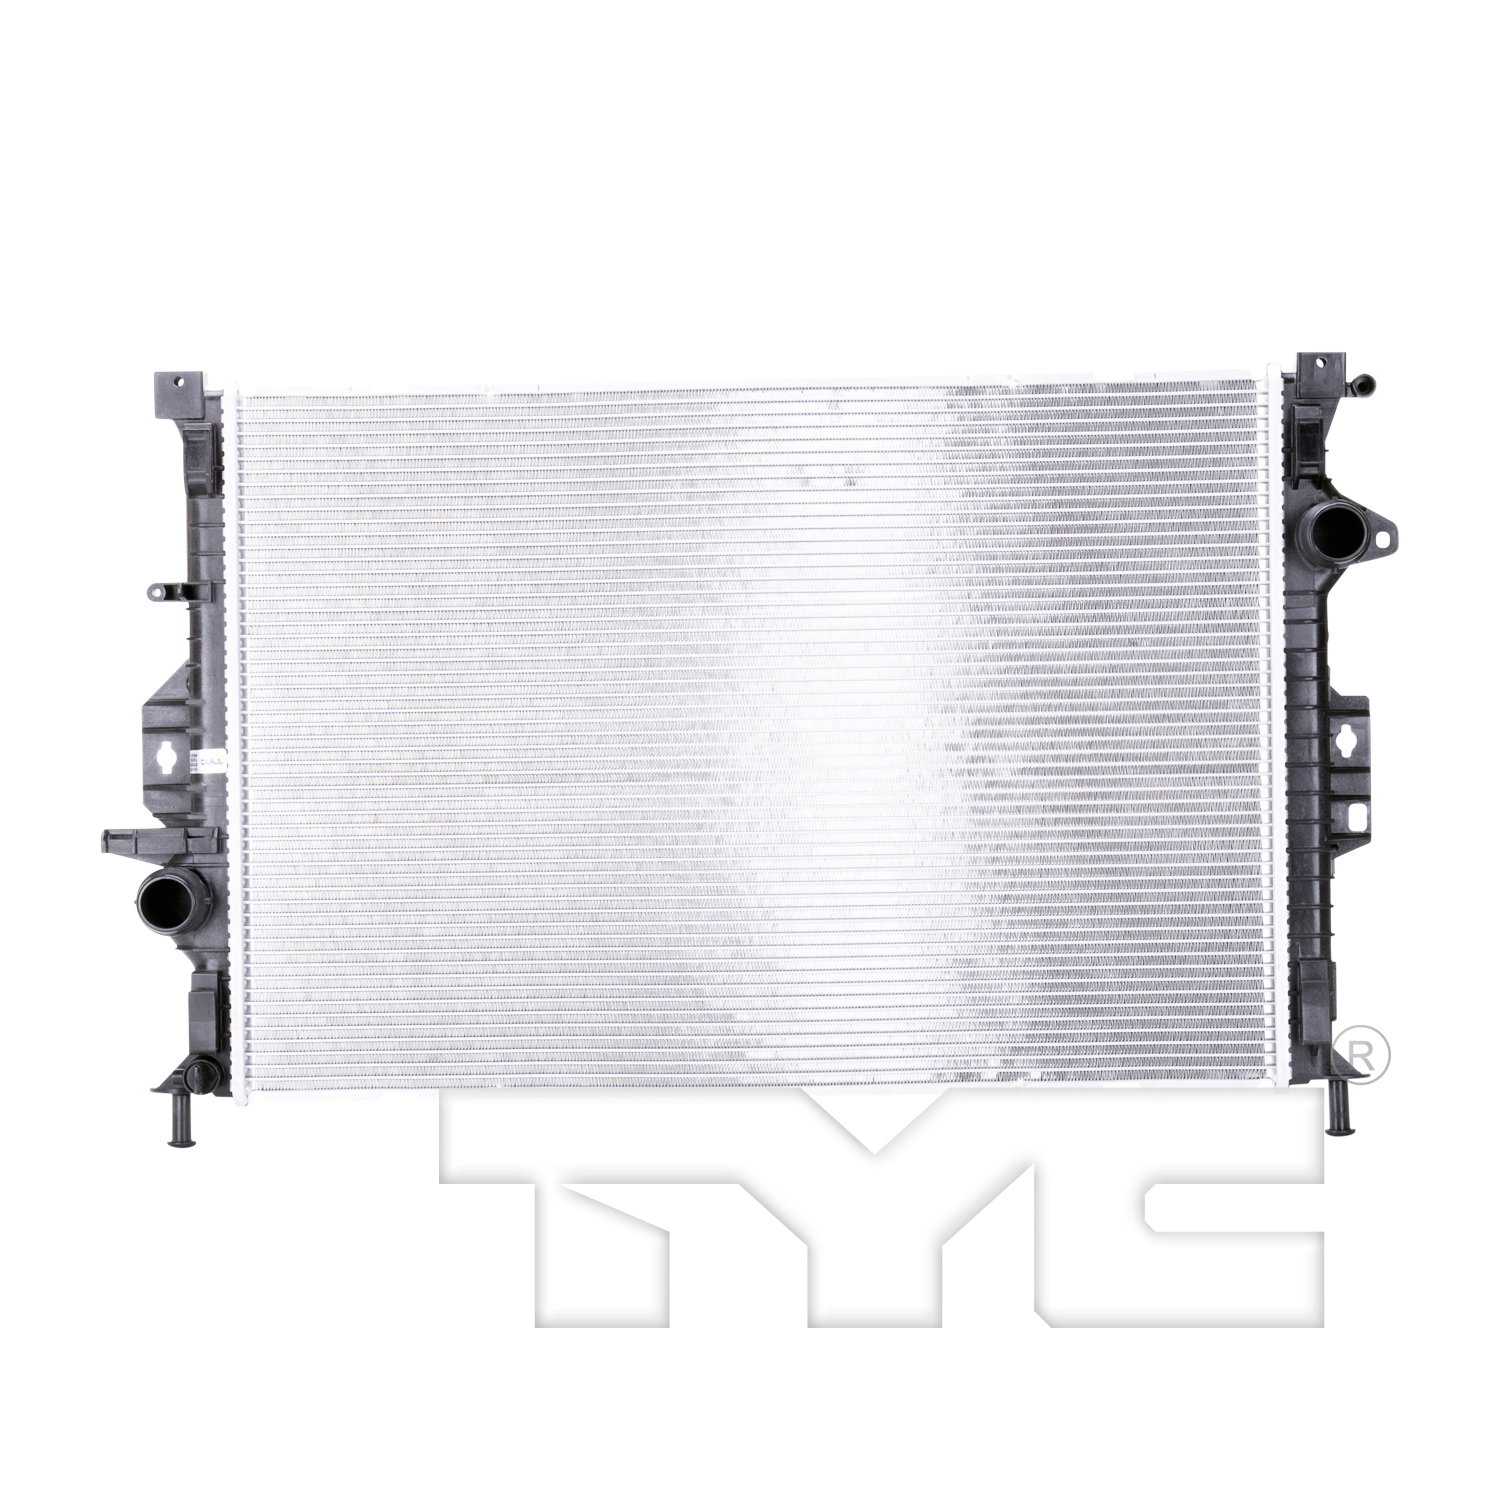 Aftermarket RADIATORS for FORD - FOCUS, FOCUS,12-14,Radiator assembly